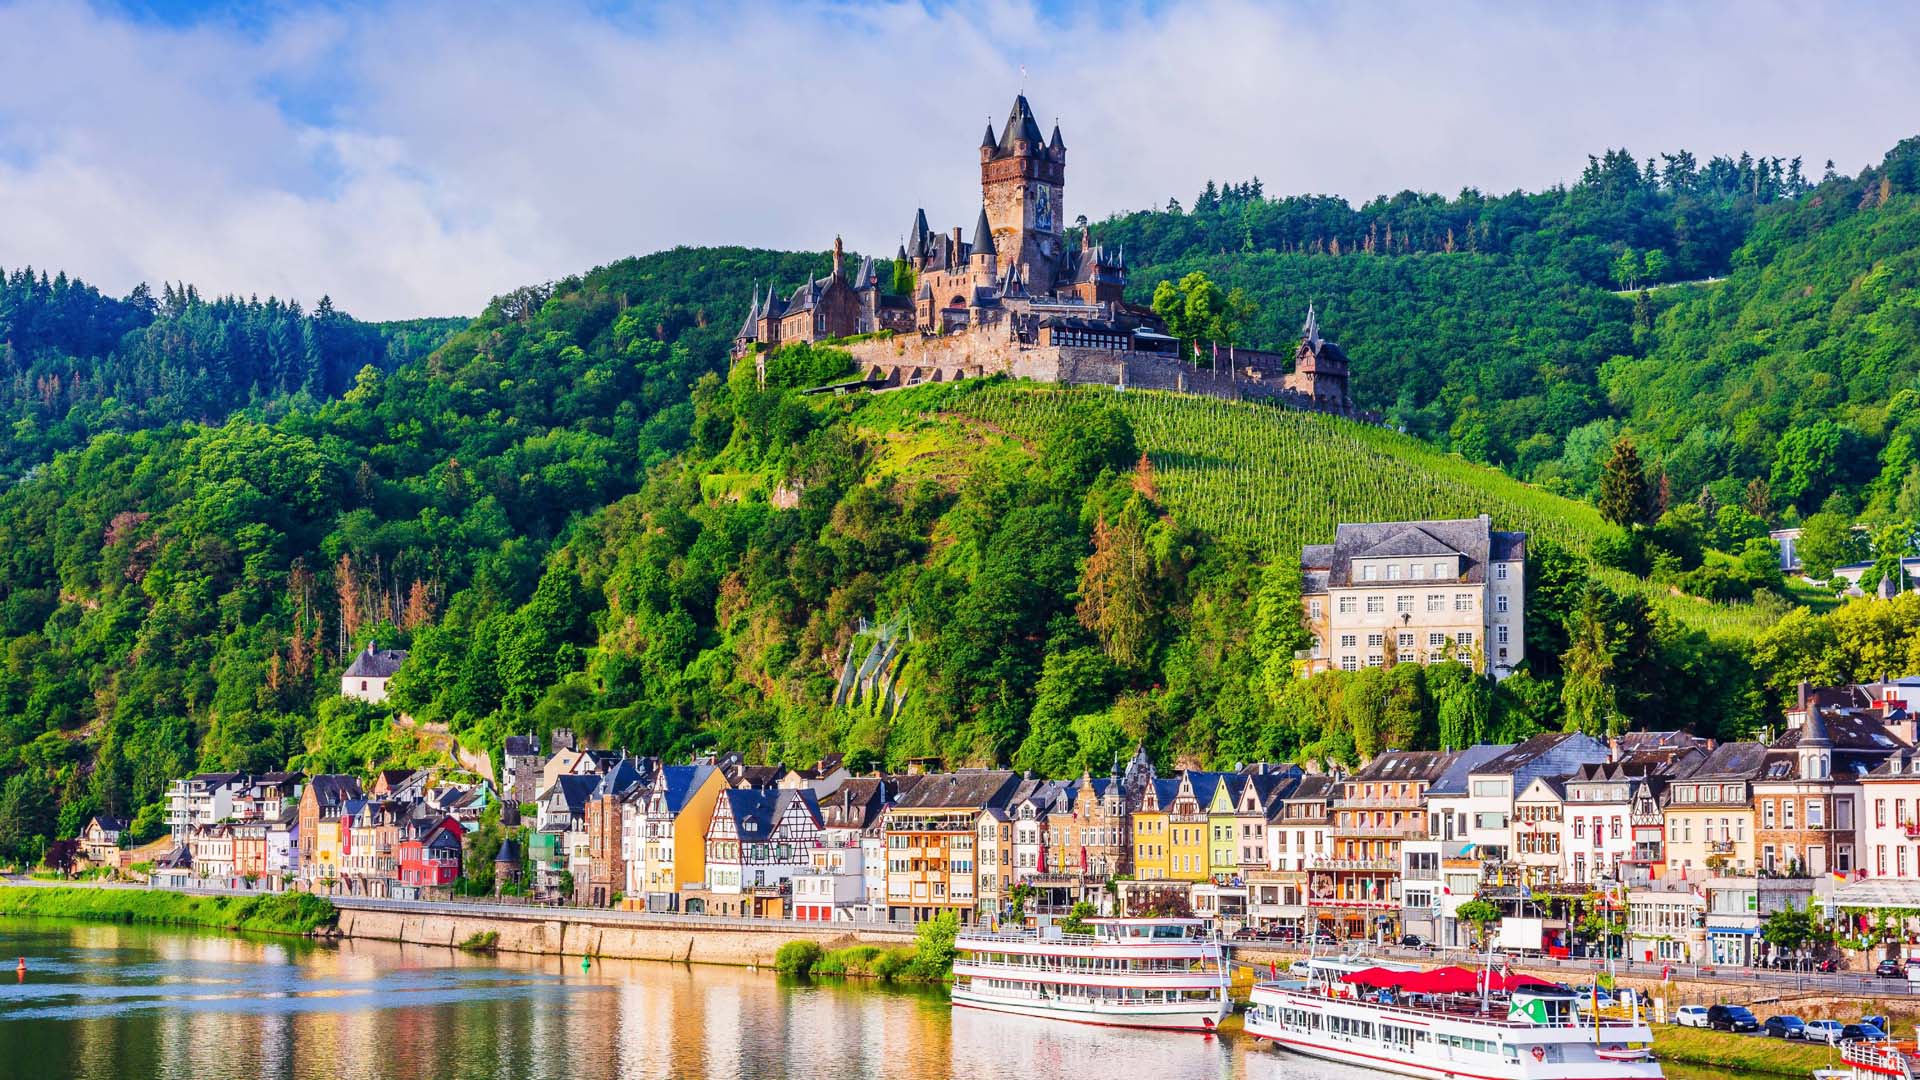 The castle in Cochem, Germany overlooking the Rhine